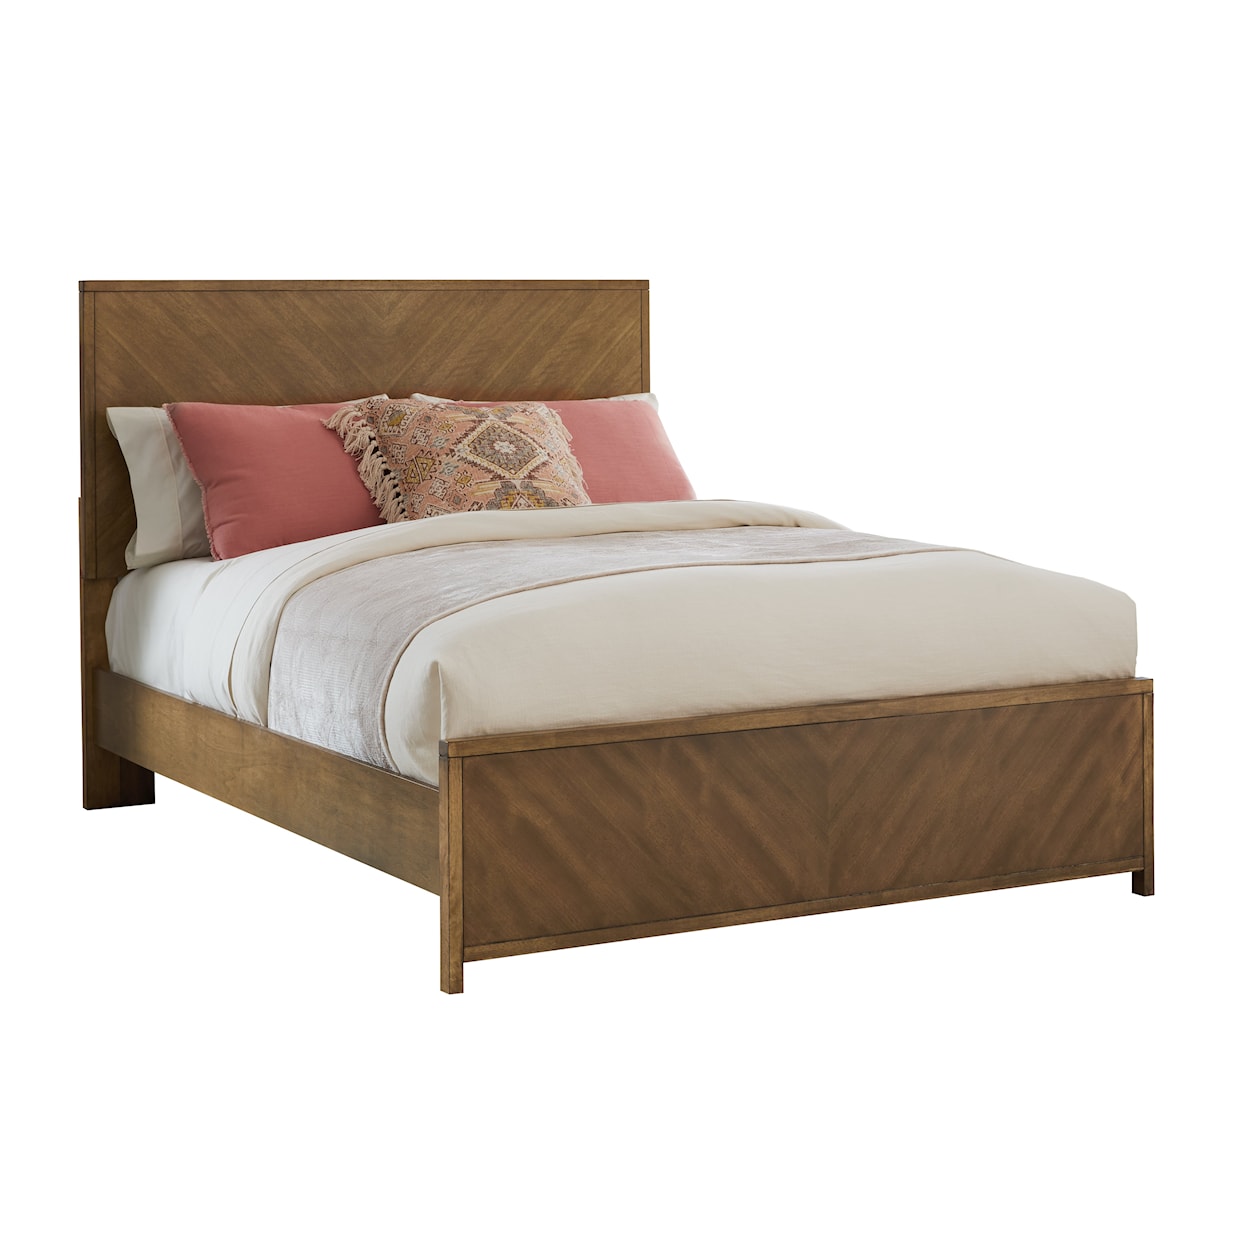 Carolina Chairs Strategy Queen Bed